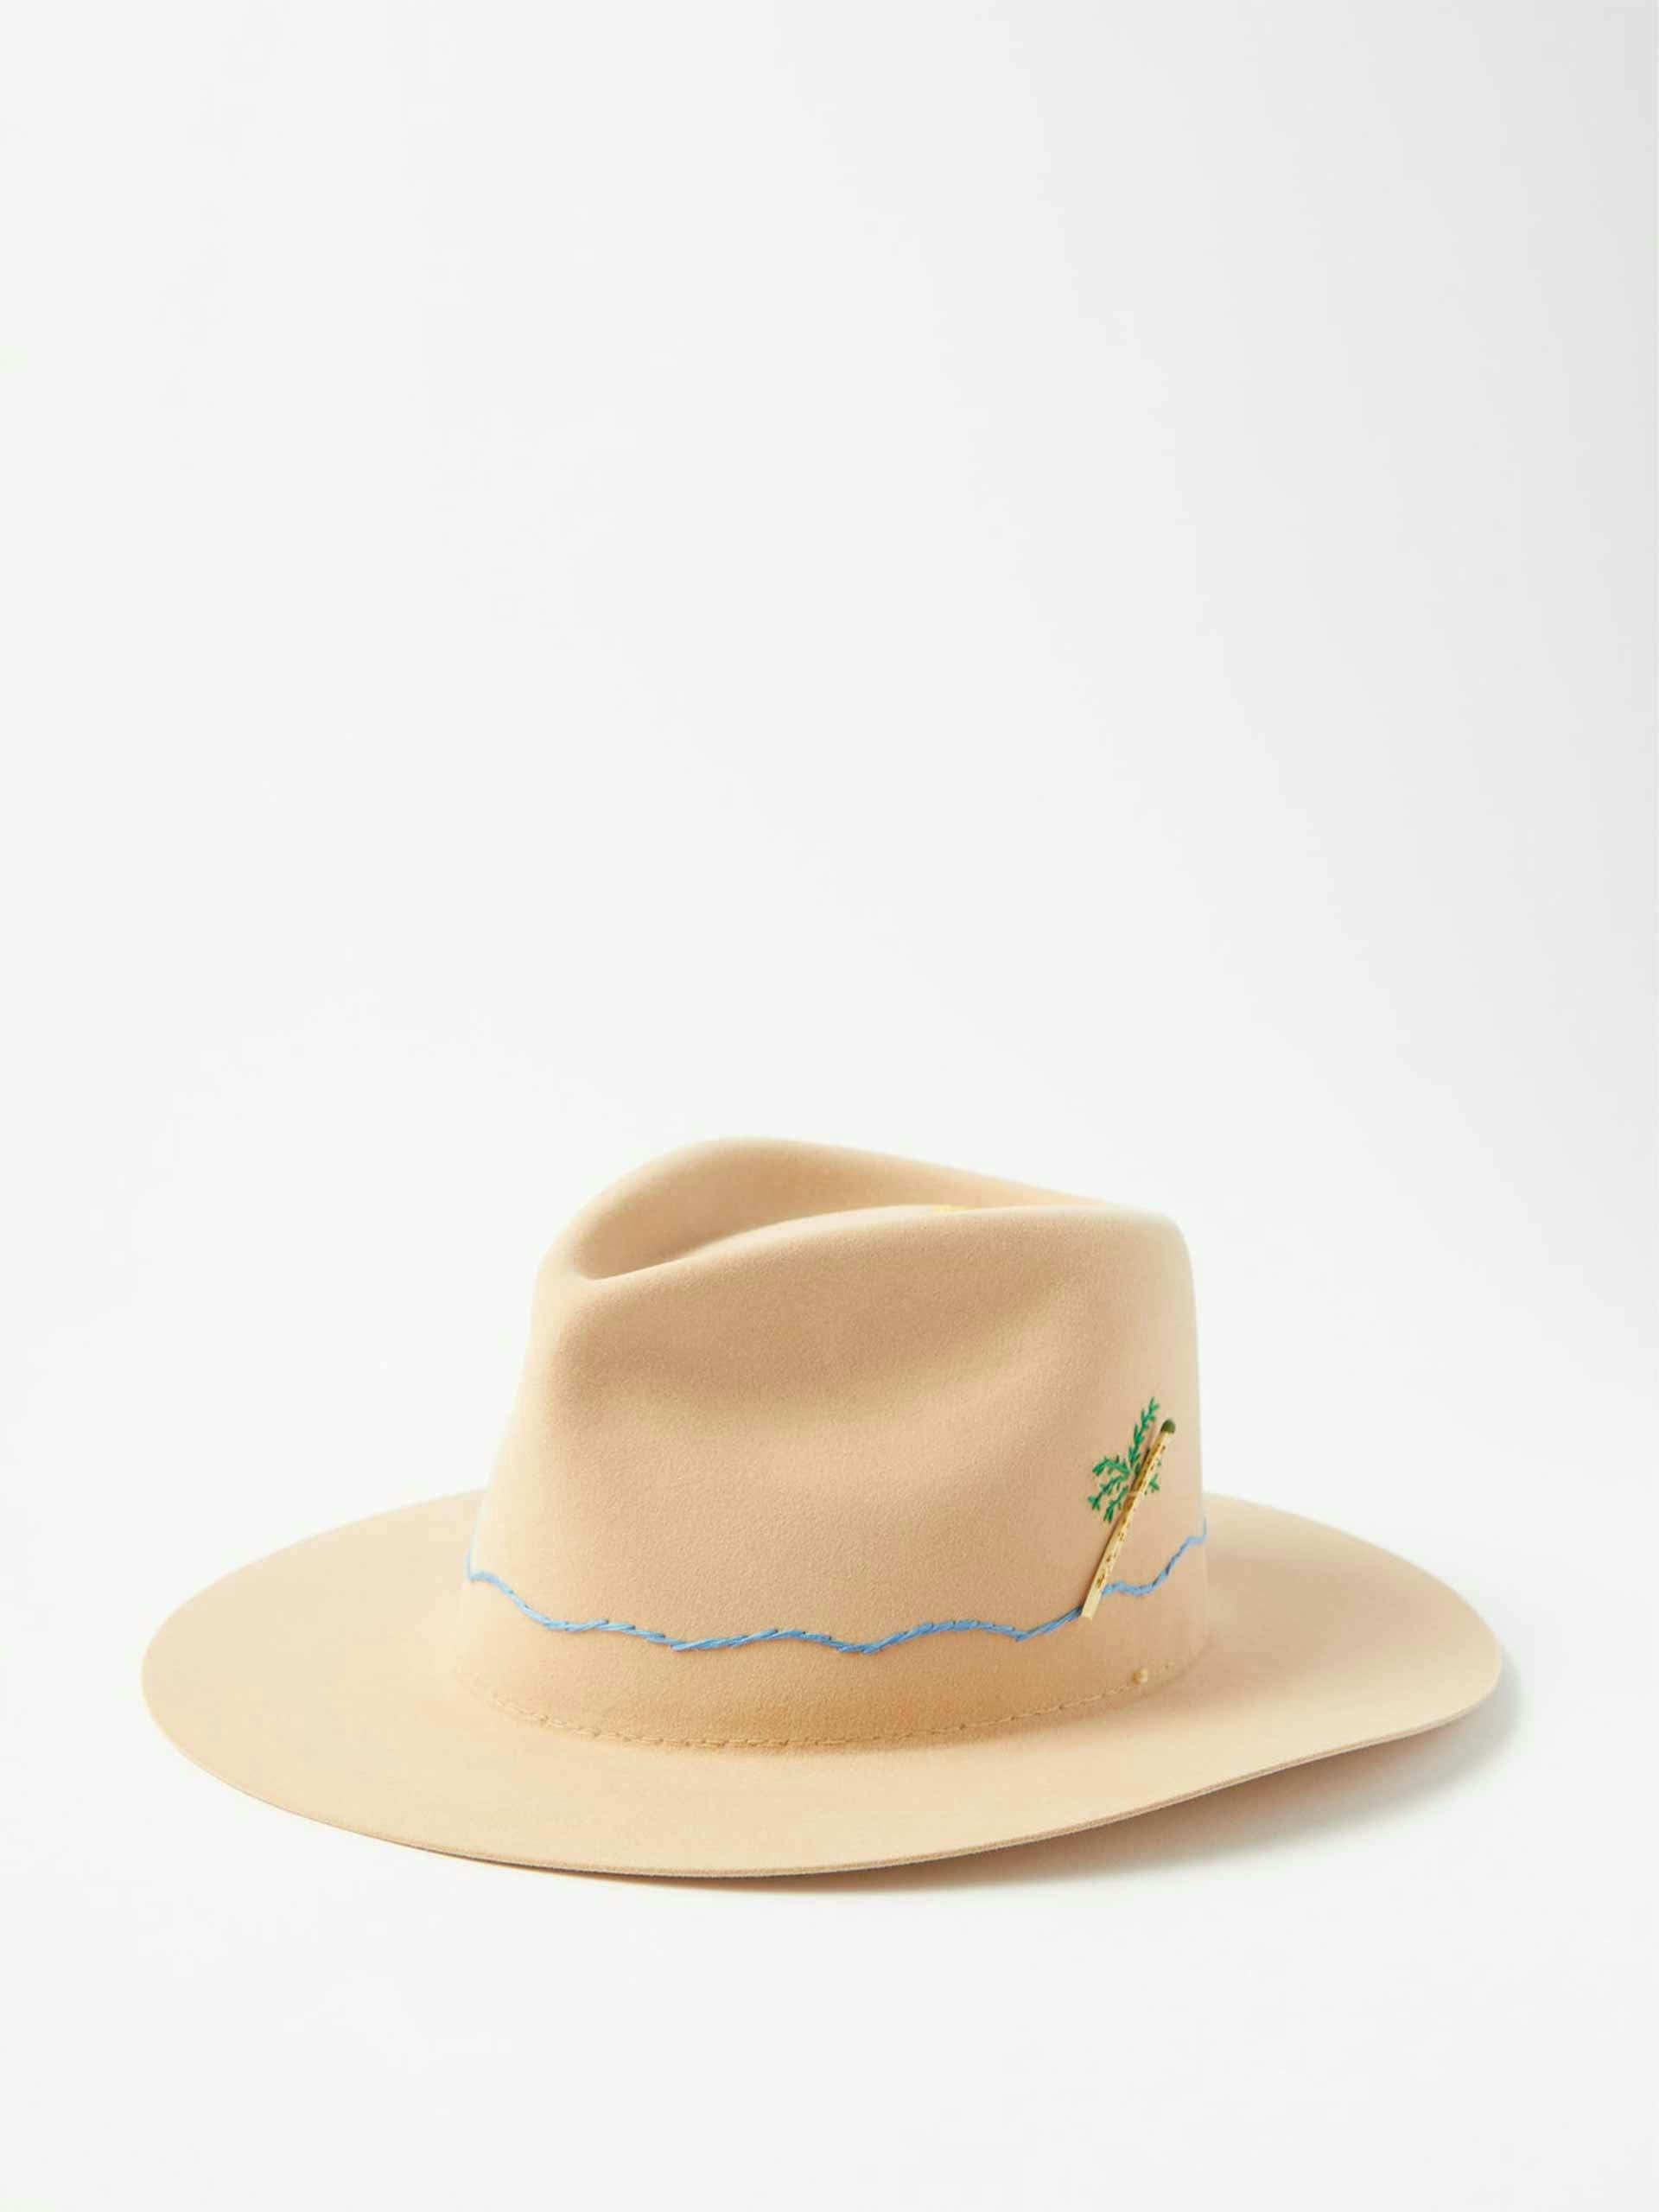 Palm tree embroidered hat